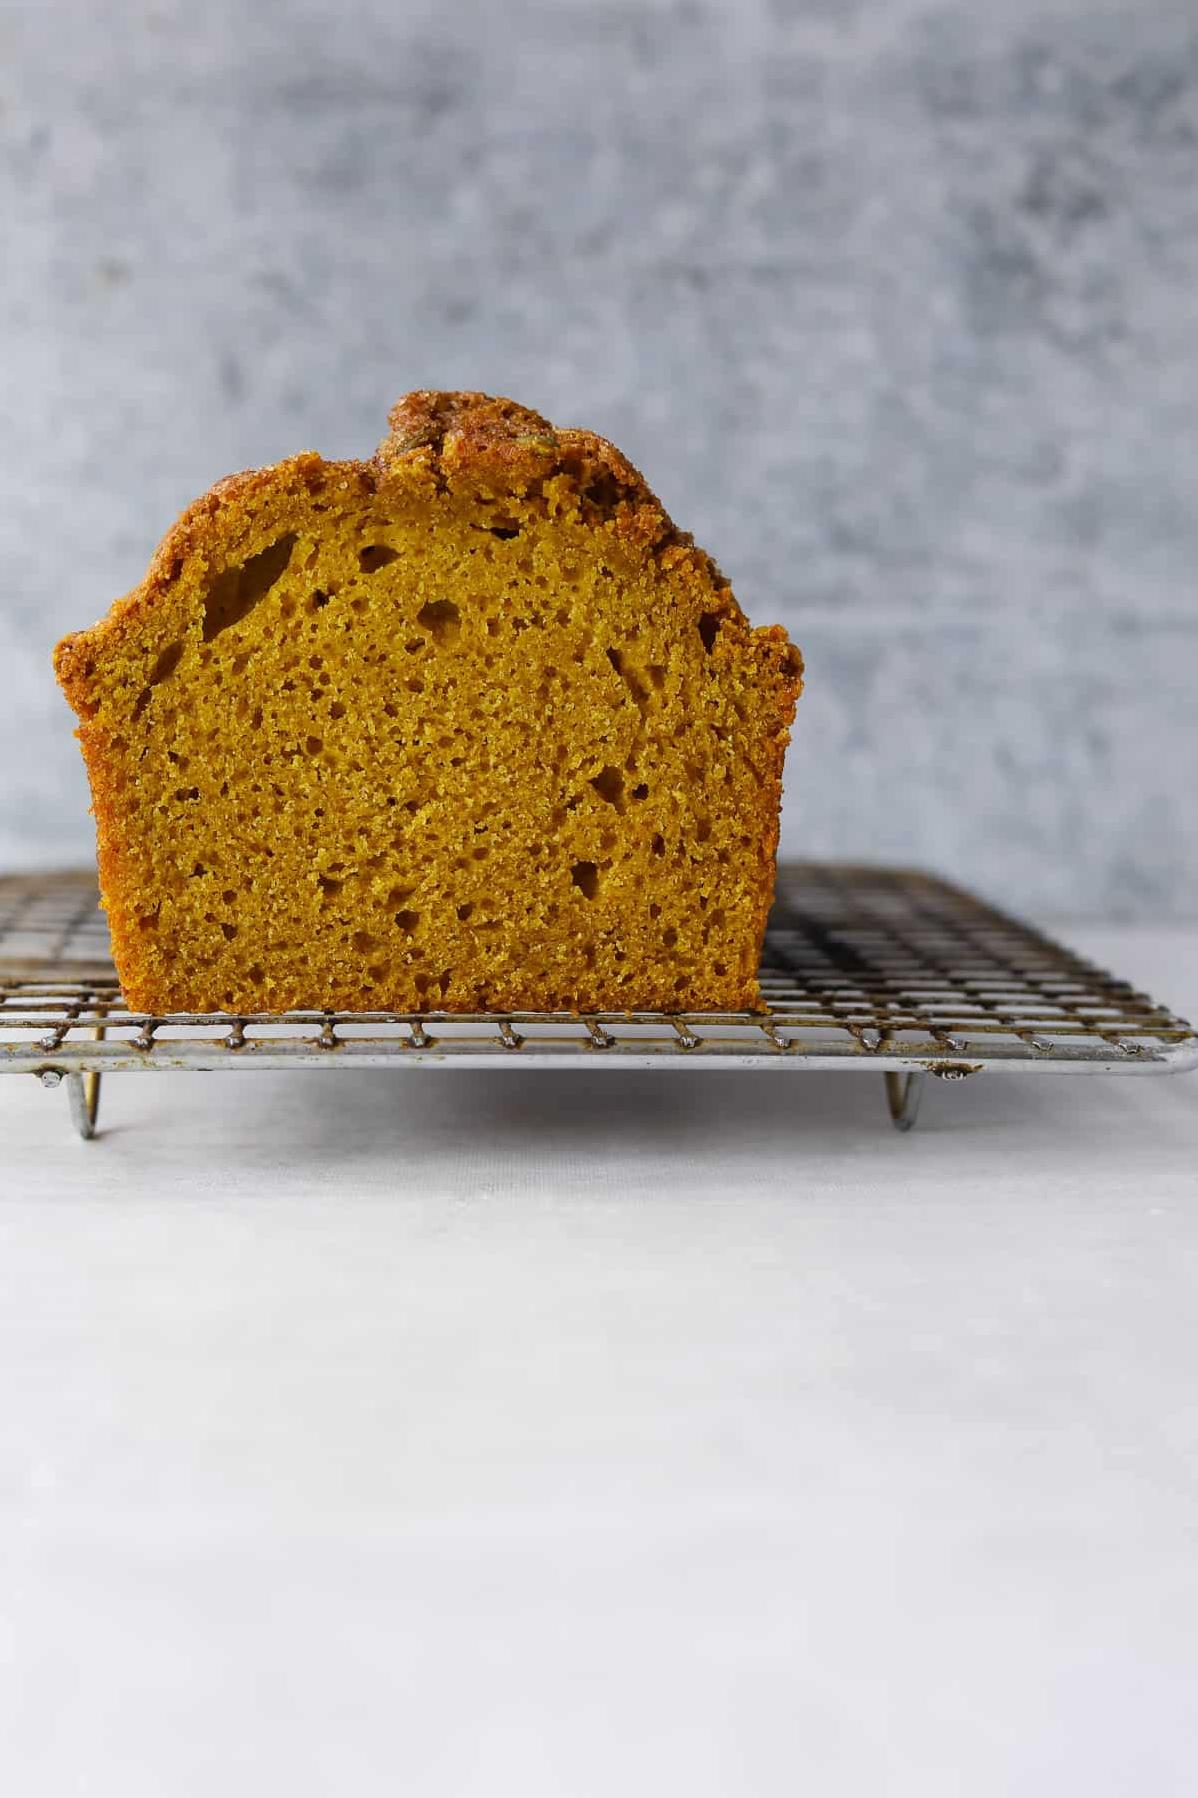  This pumpkin bread is the ultimate comfort food.